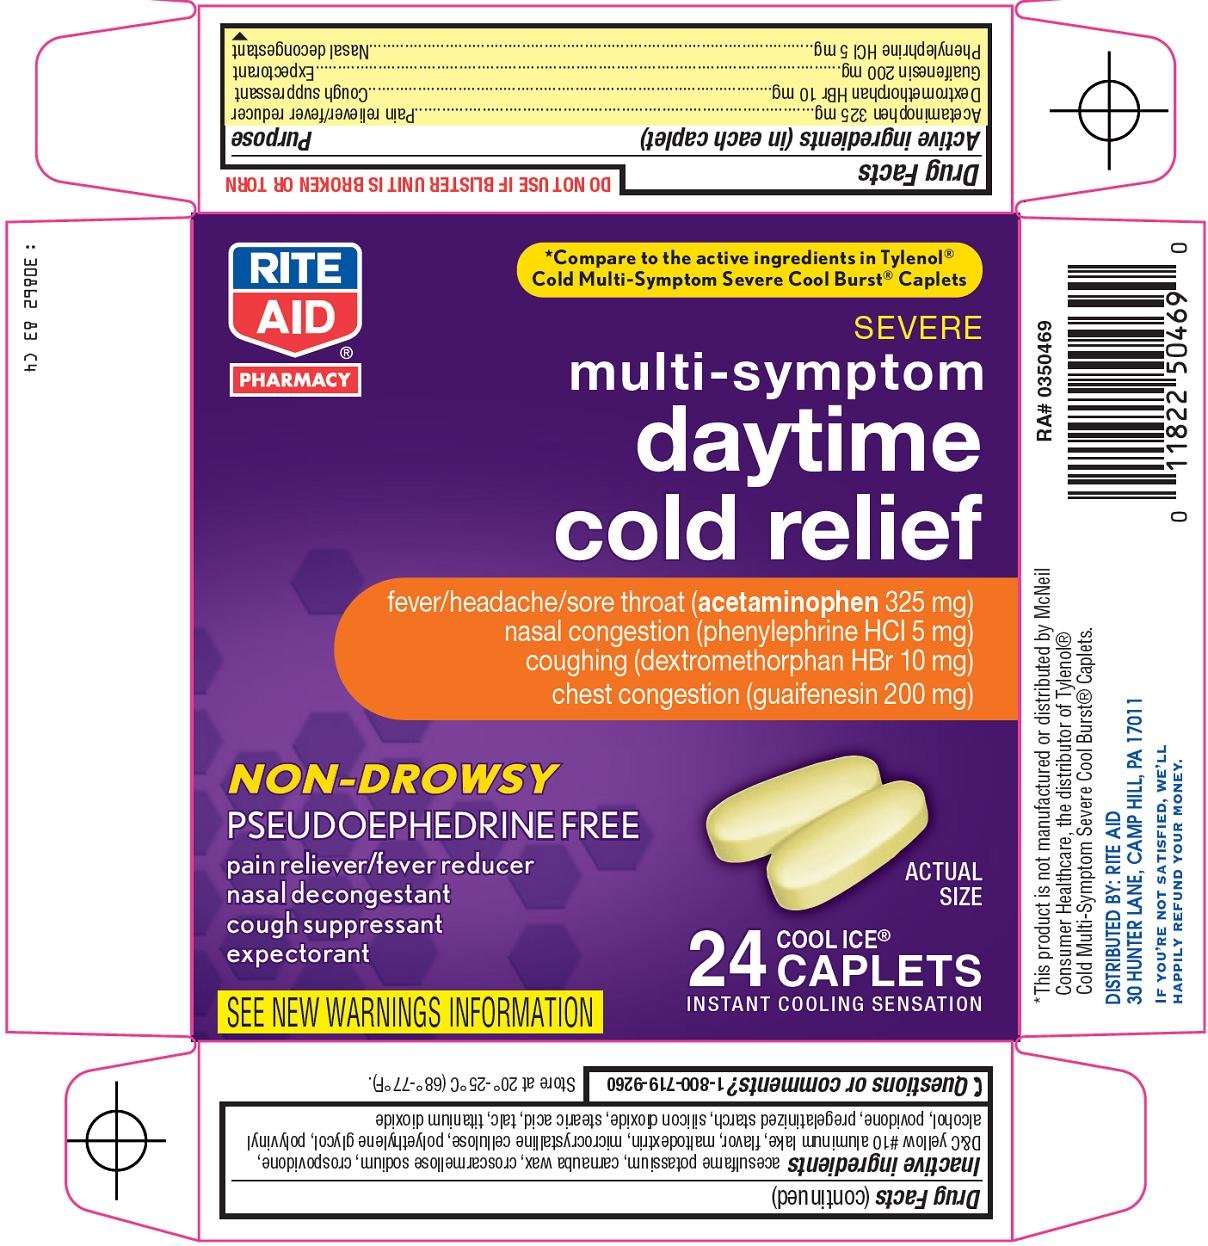 daytime cold relief